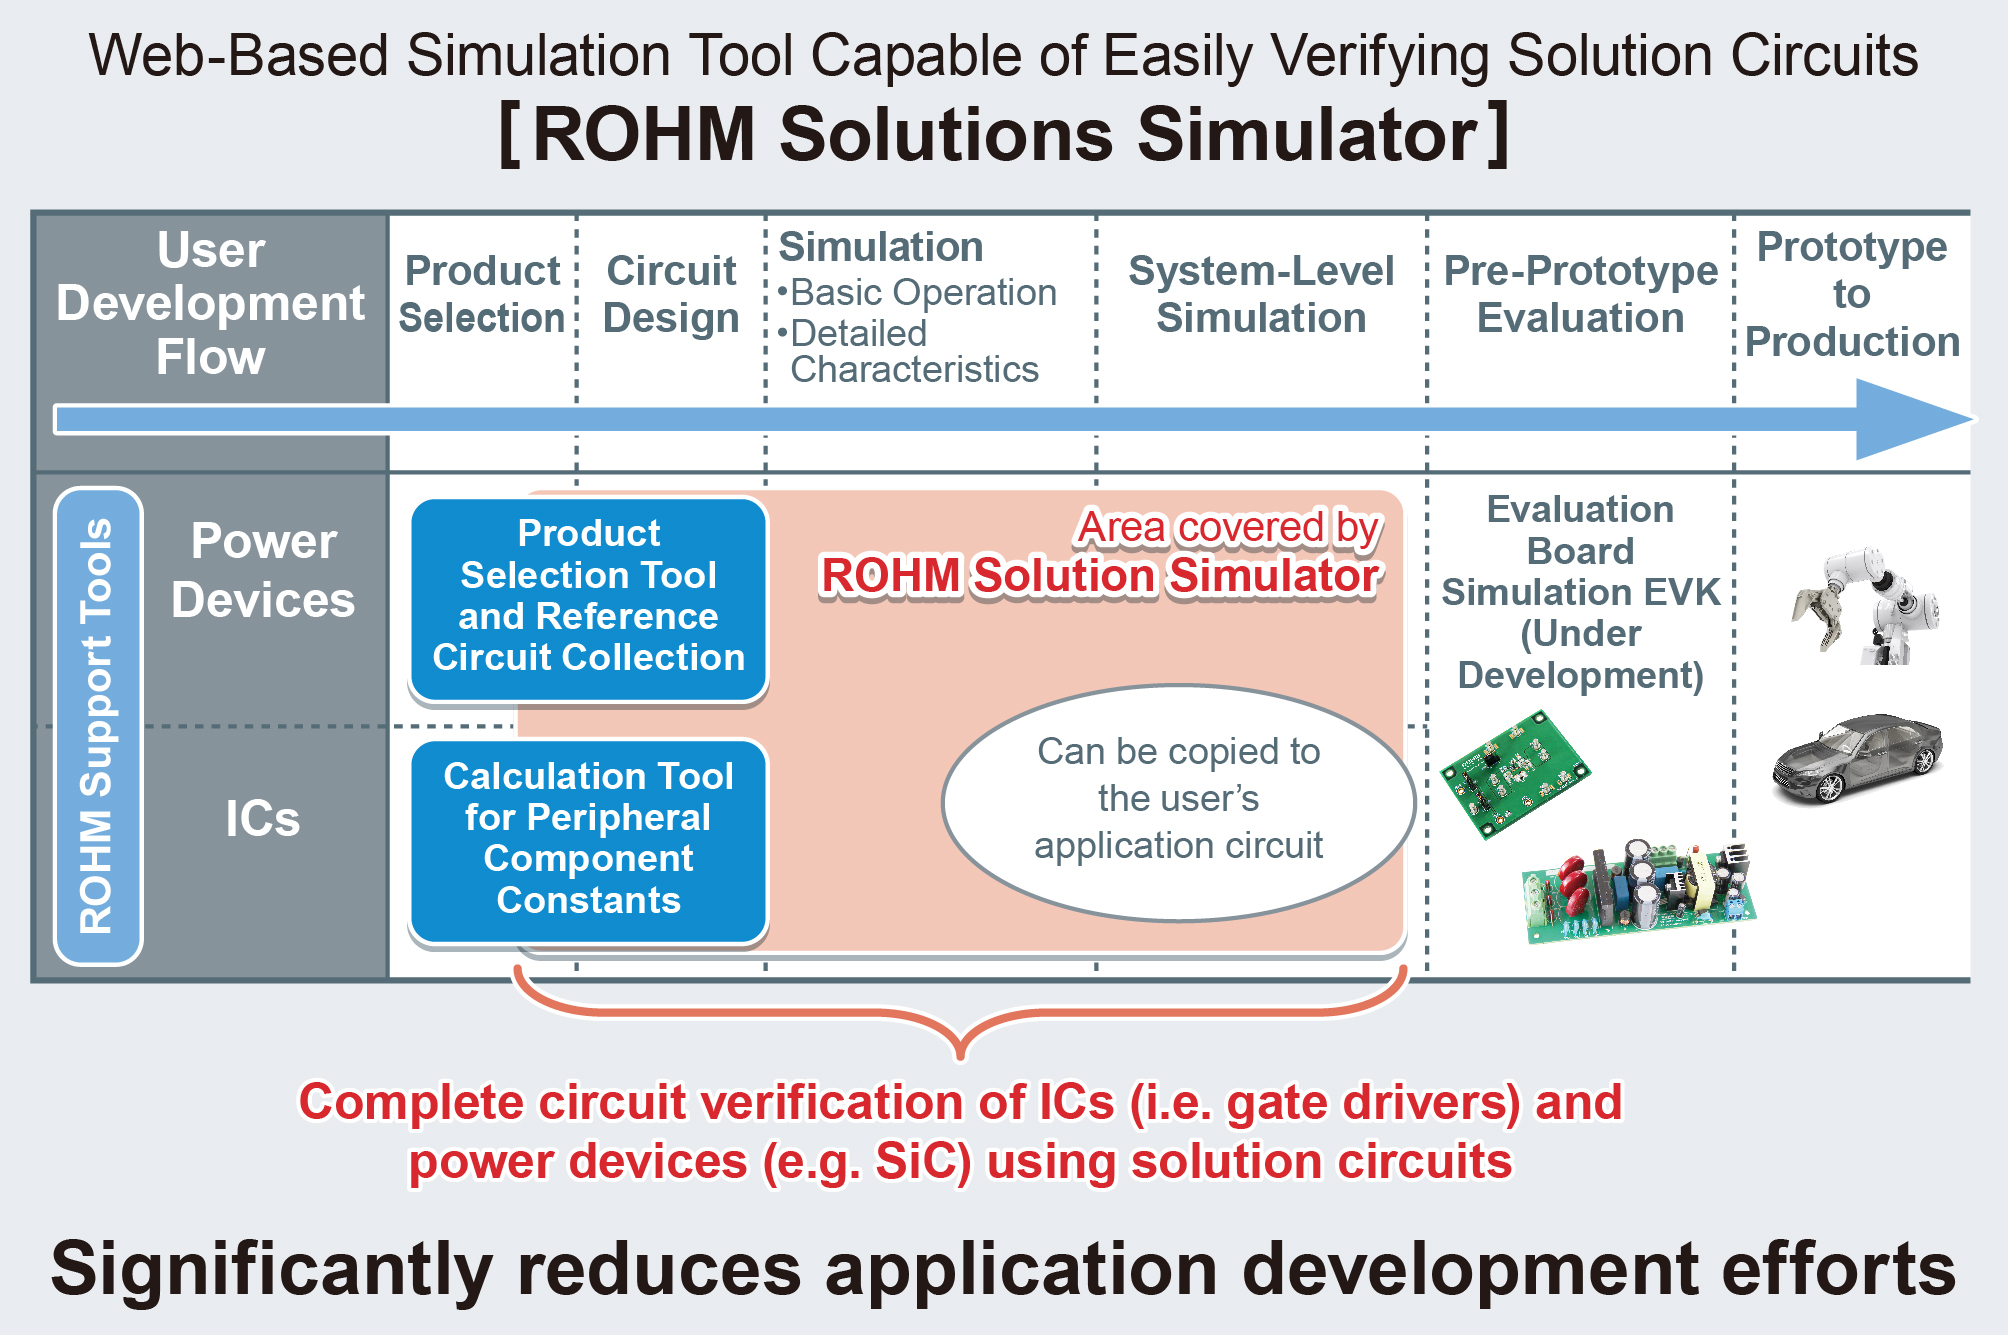 Web Simulation Tool Does Verification for Power Devices, ICs